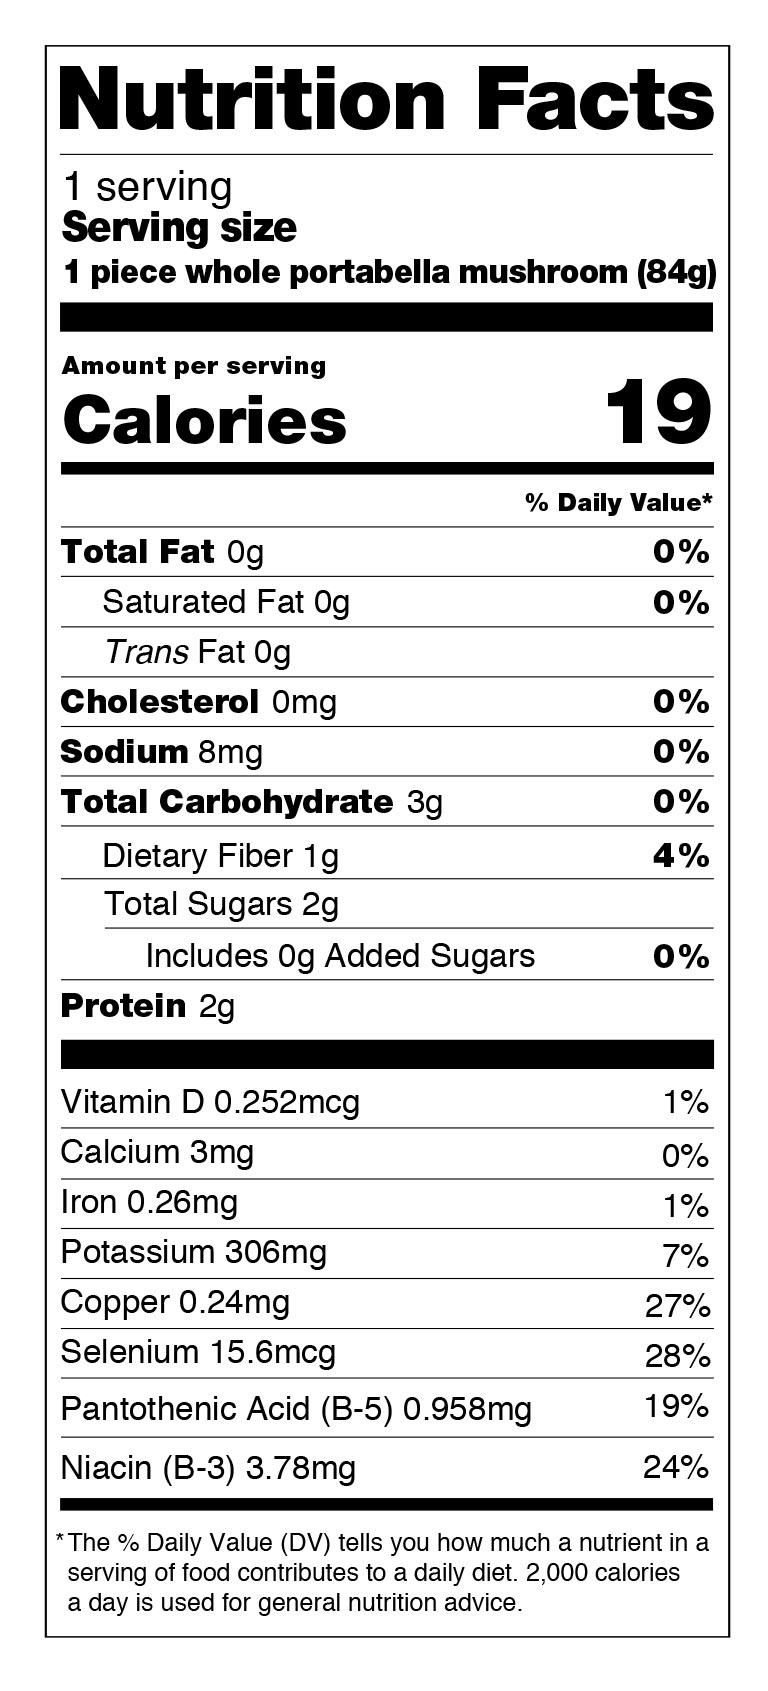 Nutrition facts label for portabella mushrooms